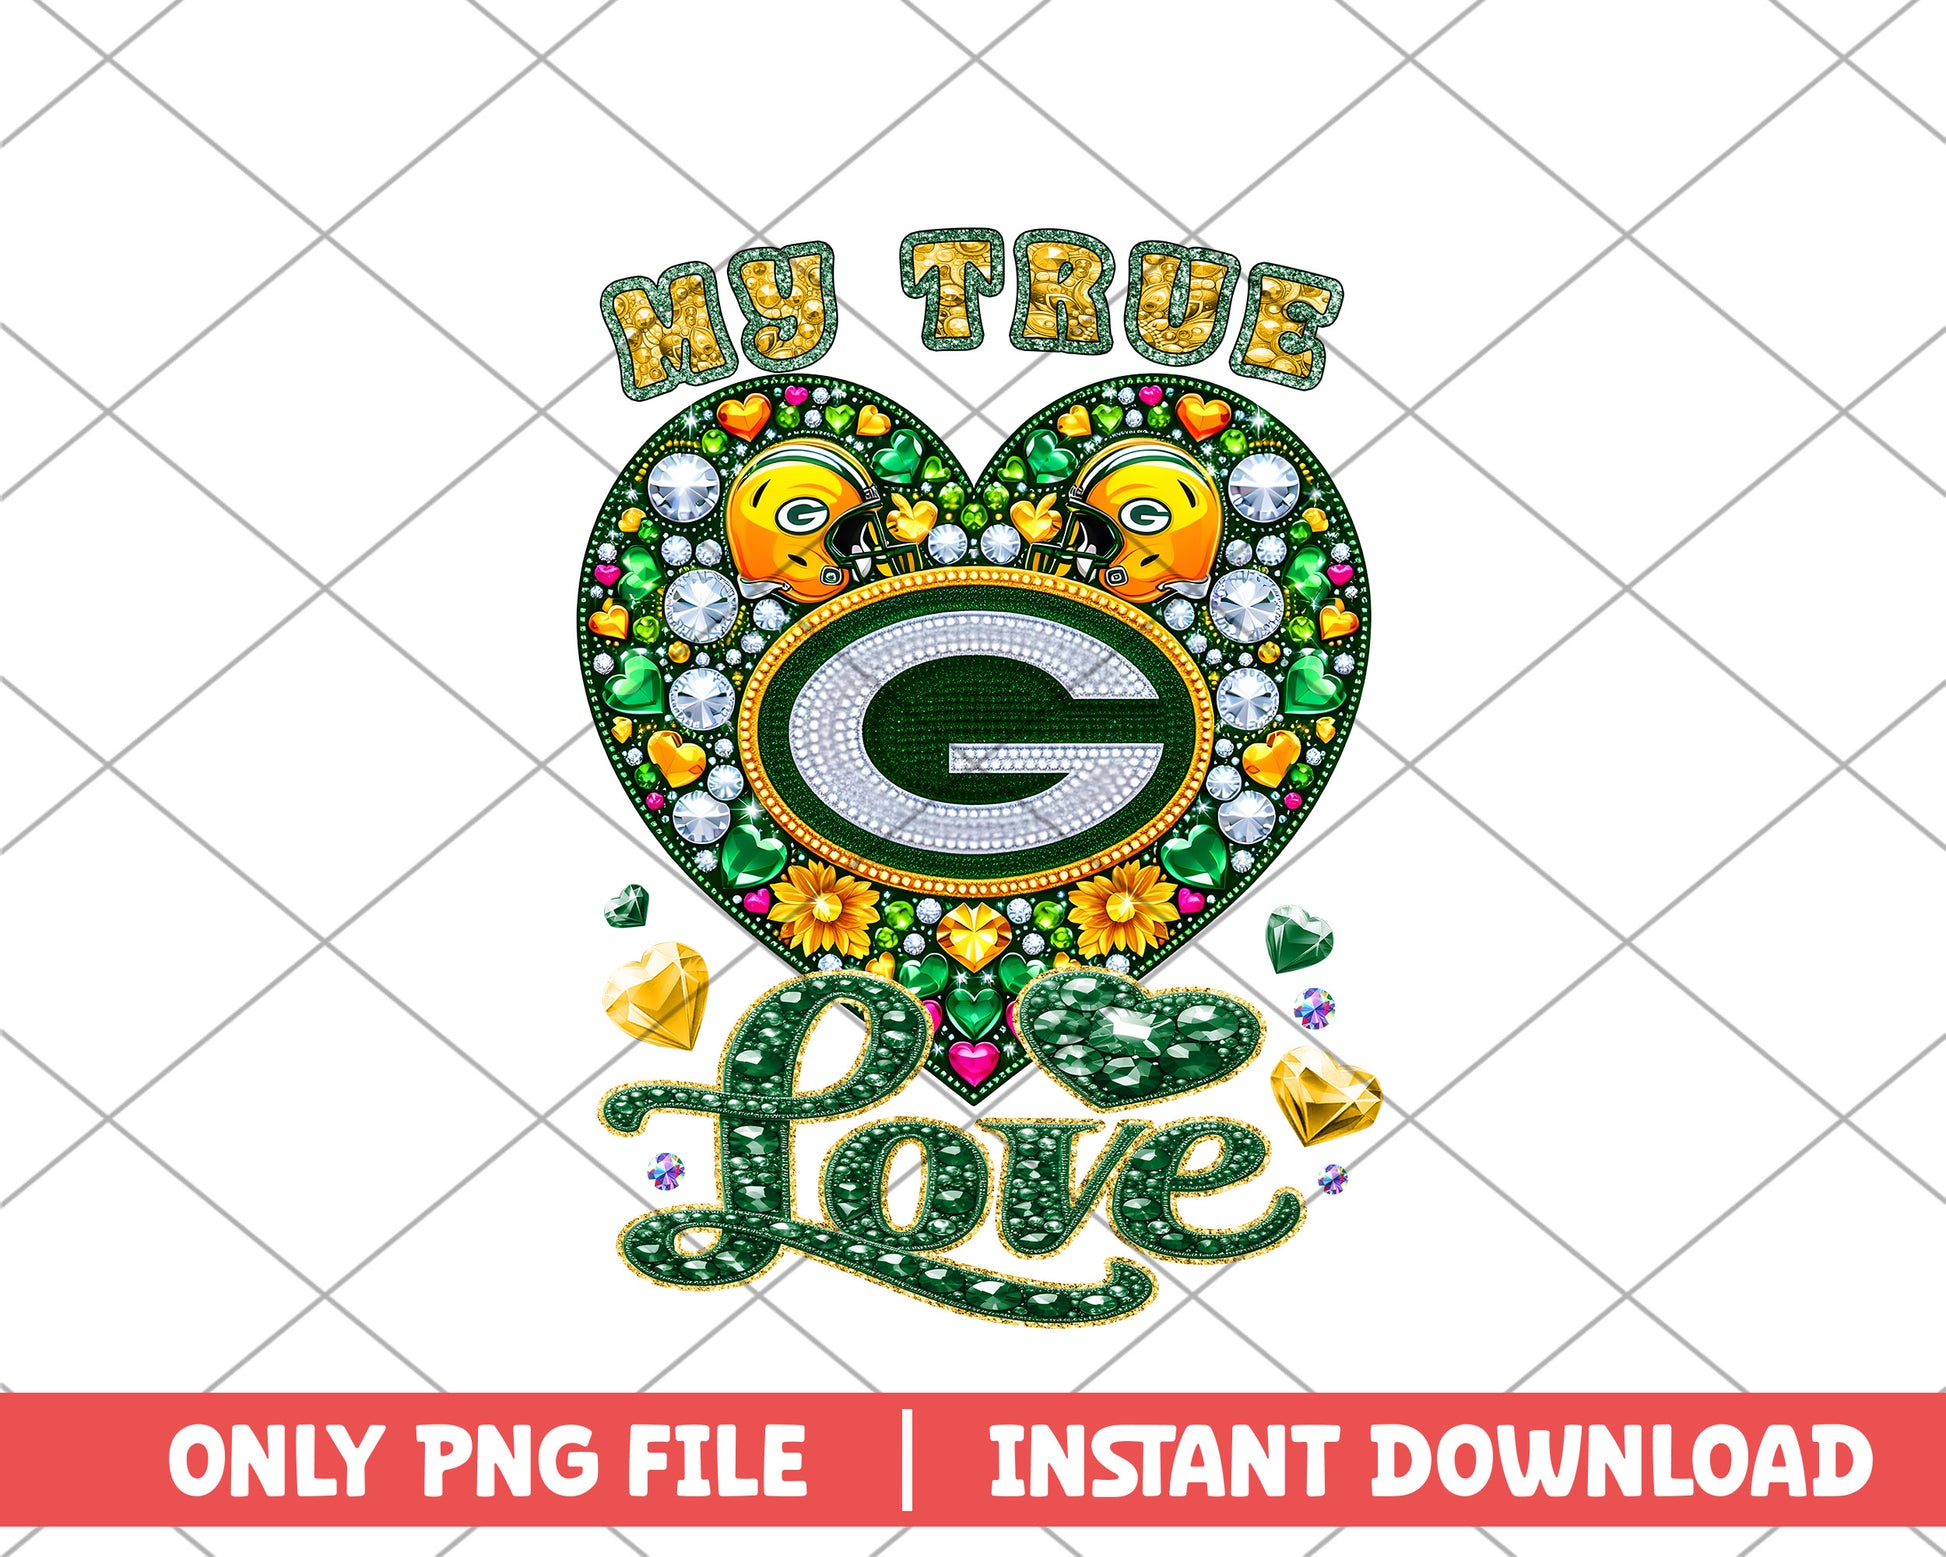 Green Bay Packers my true love png, Green Bay Packers png